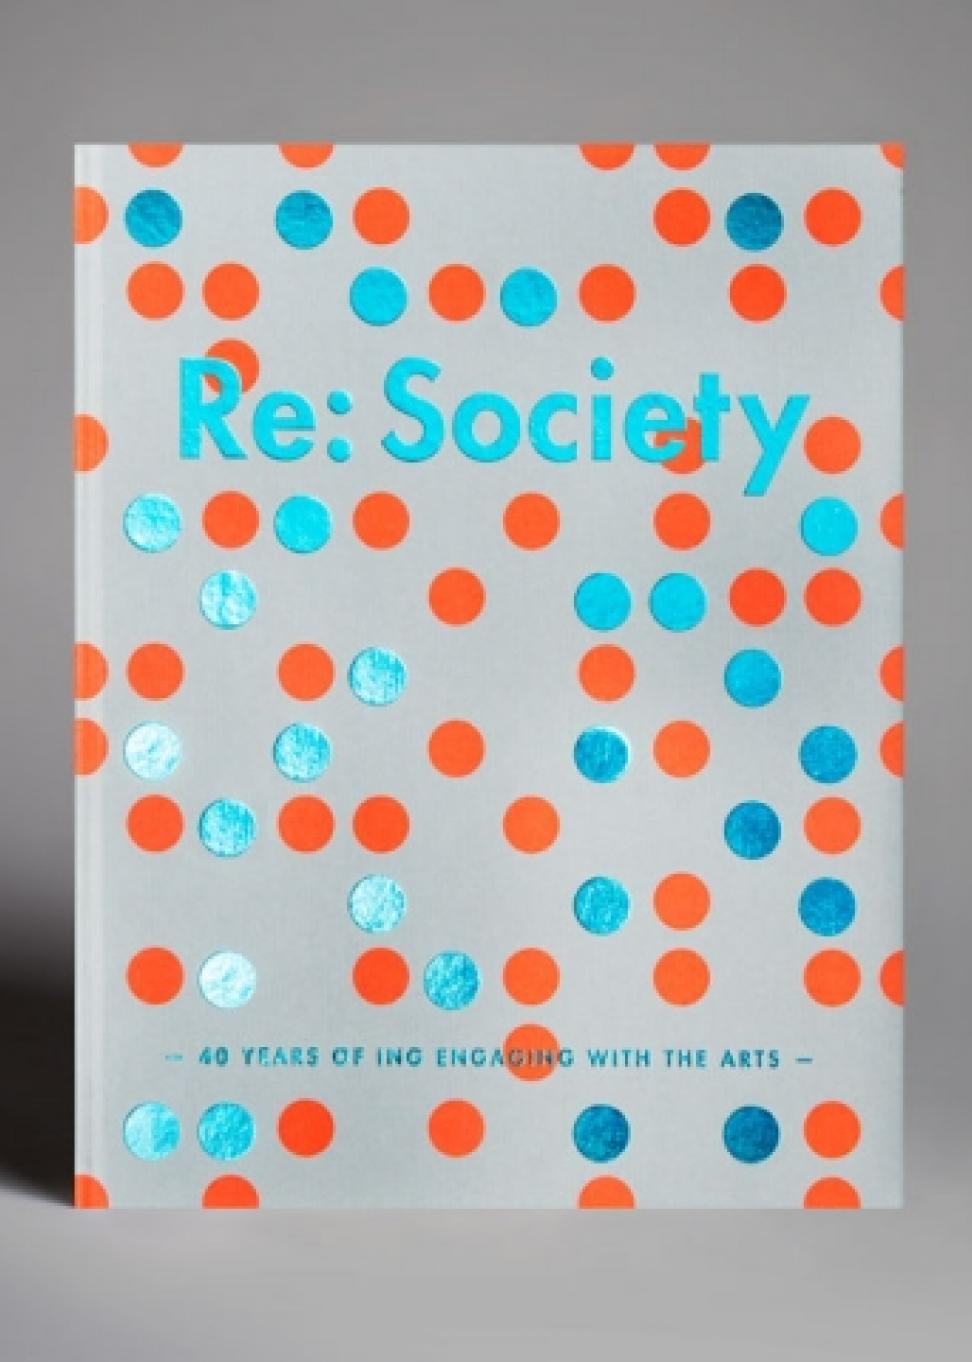 RE: SOCIETY. 40 years of ING engaging with the arts 